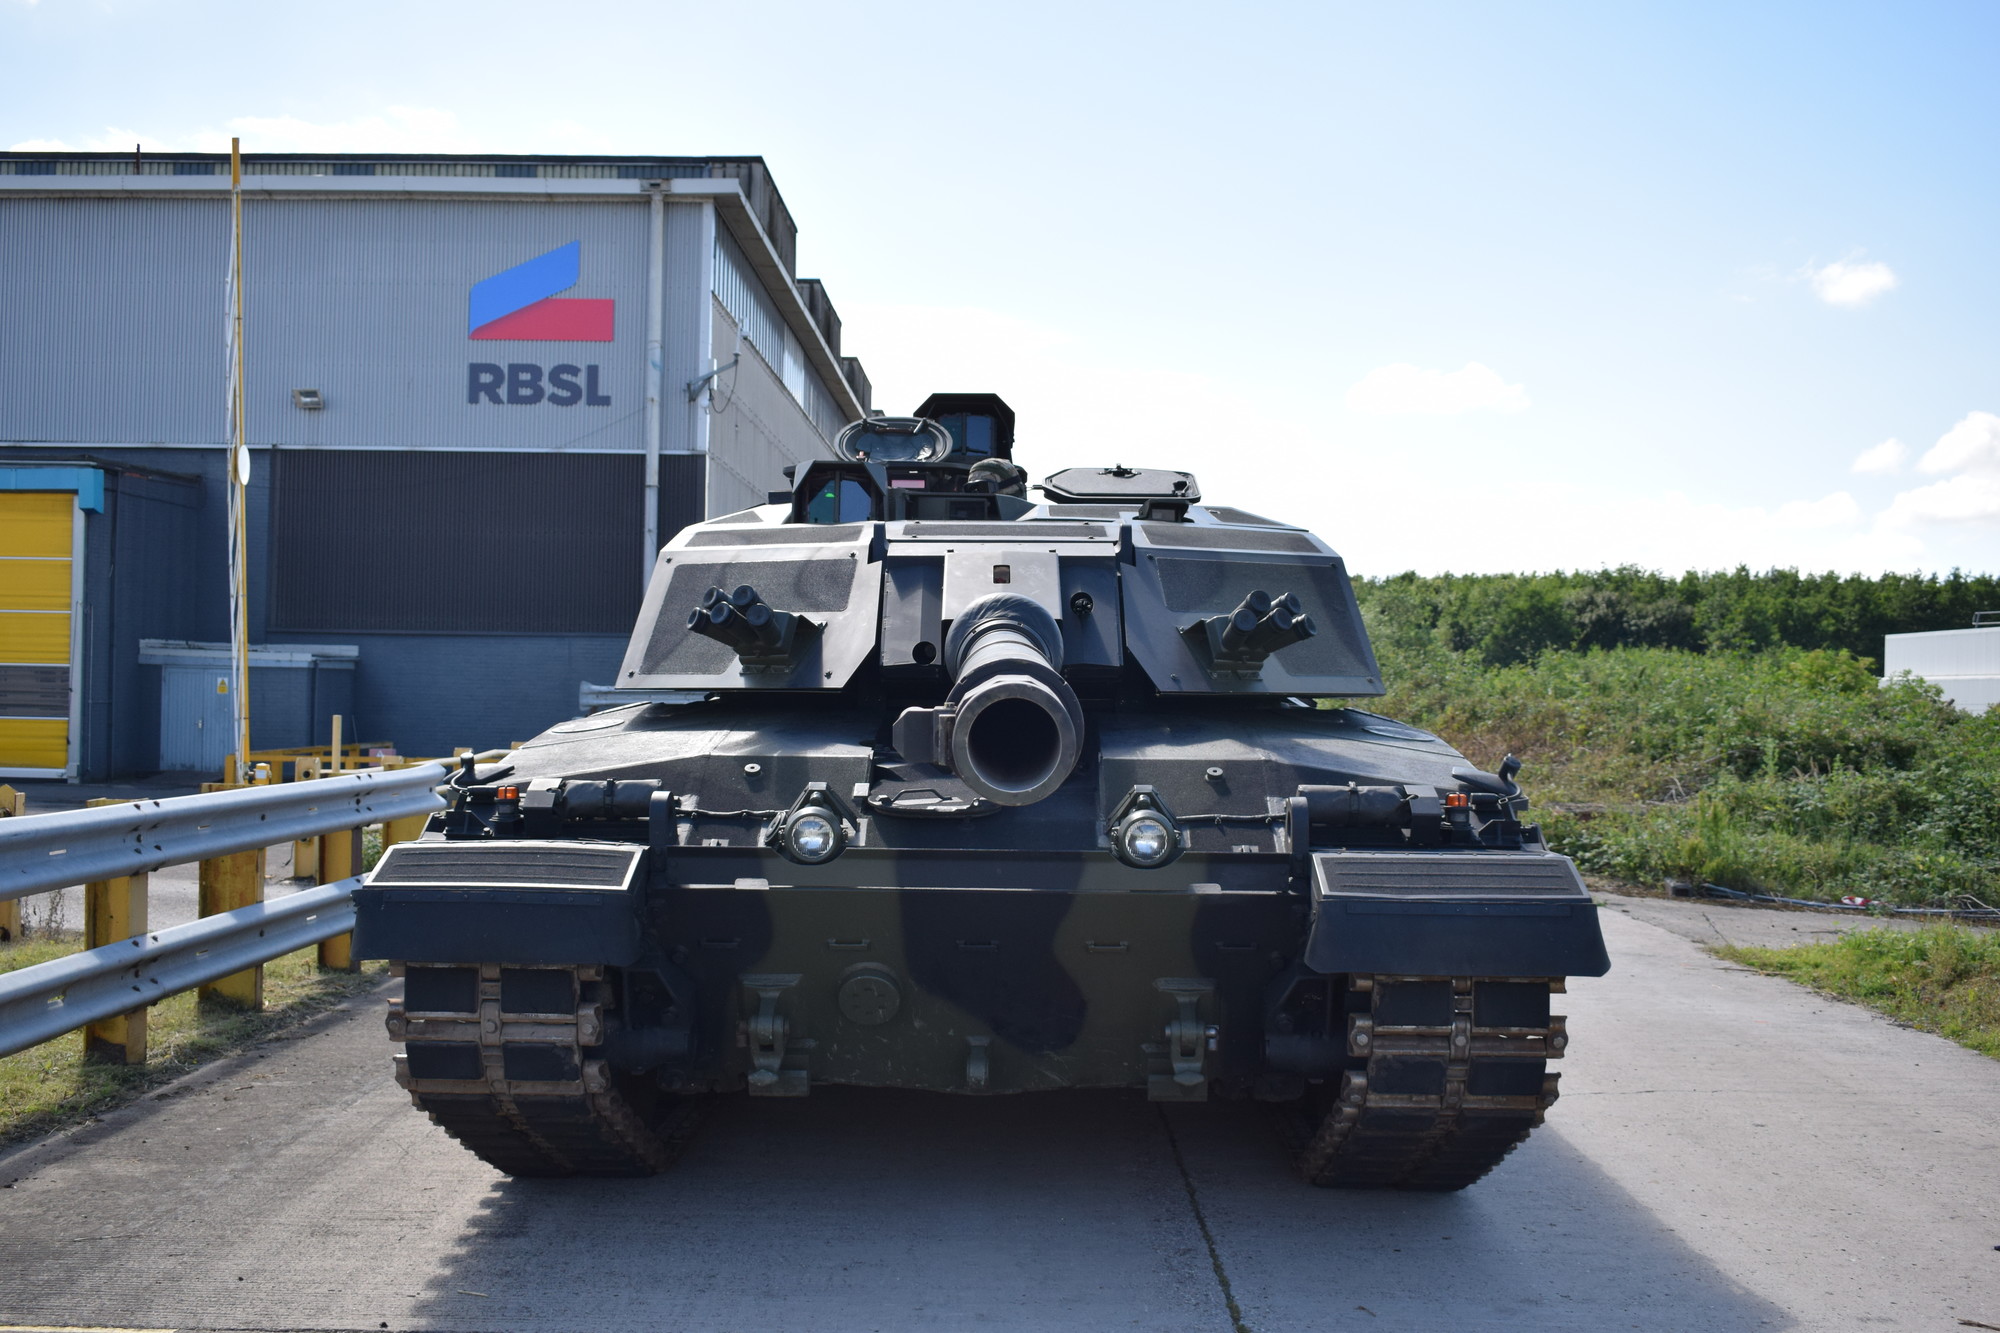 A tank stored outside the RBSL factory